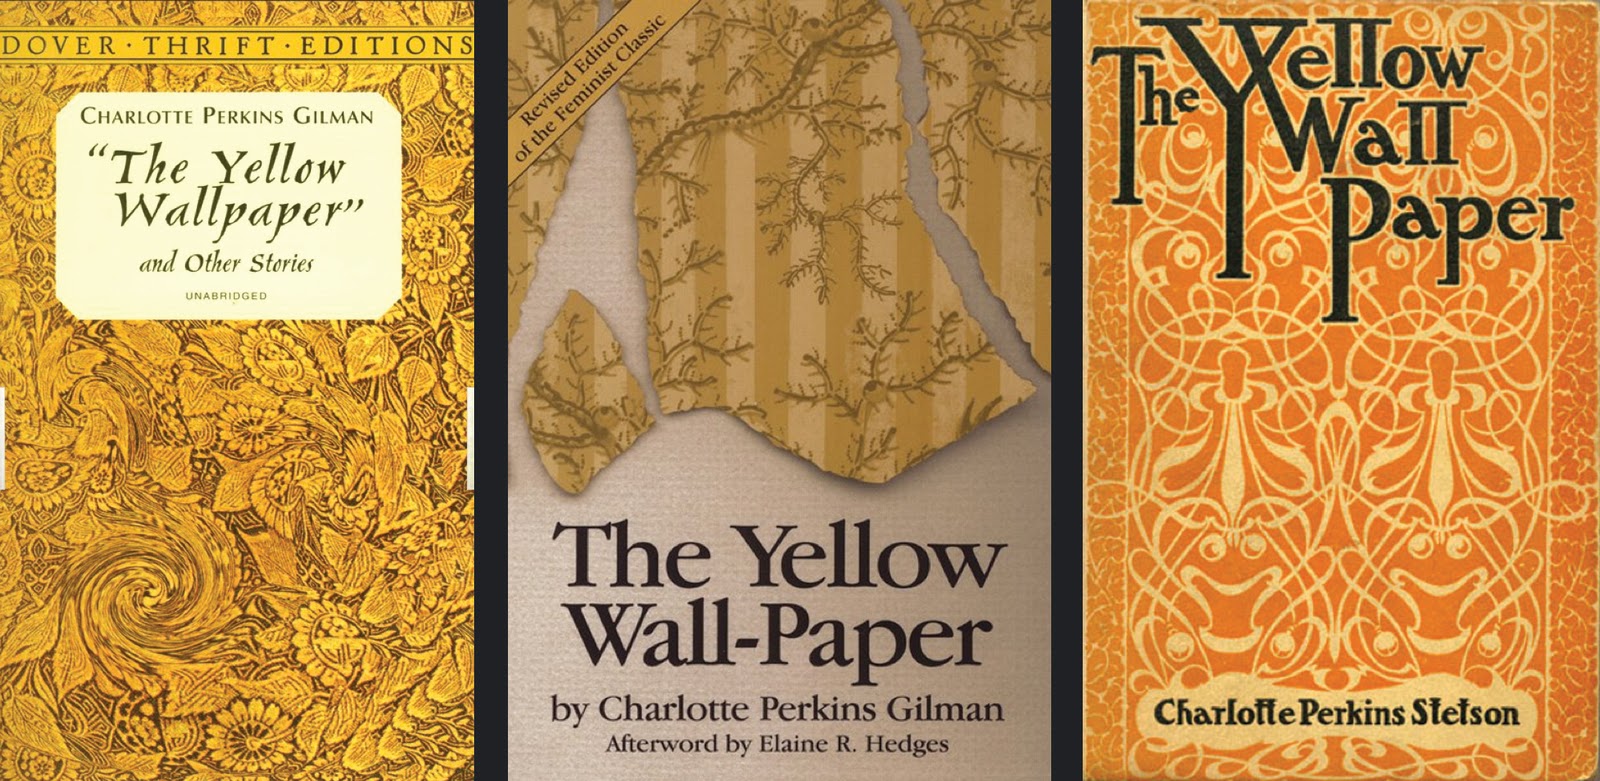 The Yellow Wallpaper Oppression On